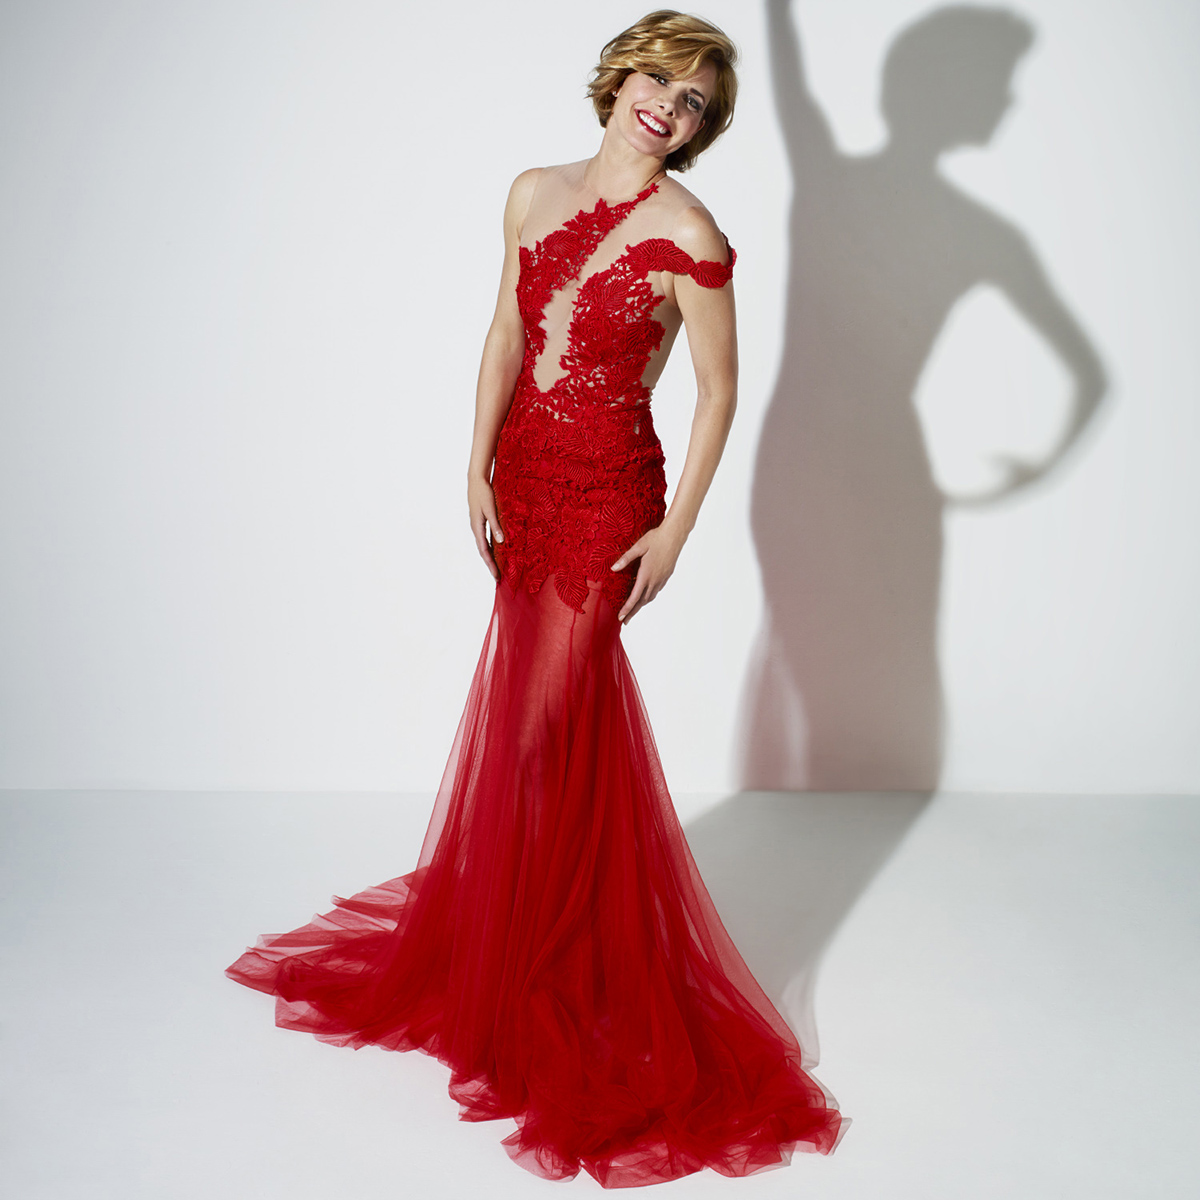 darcey bussell 0023